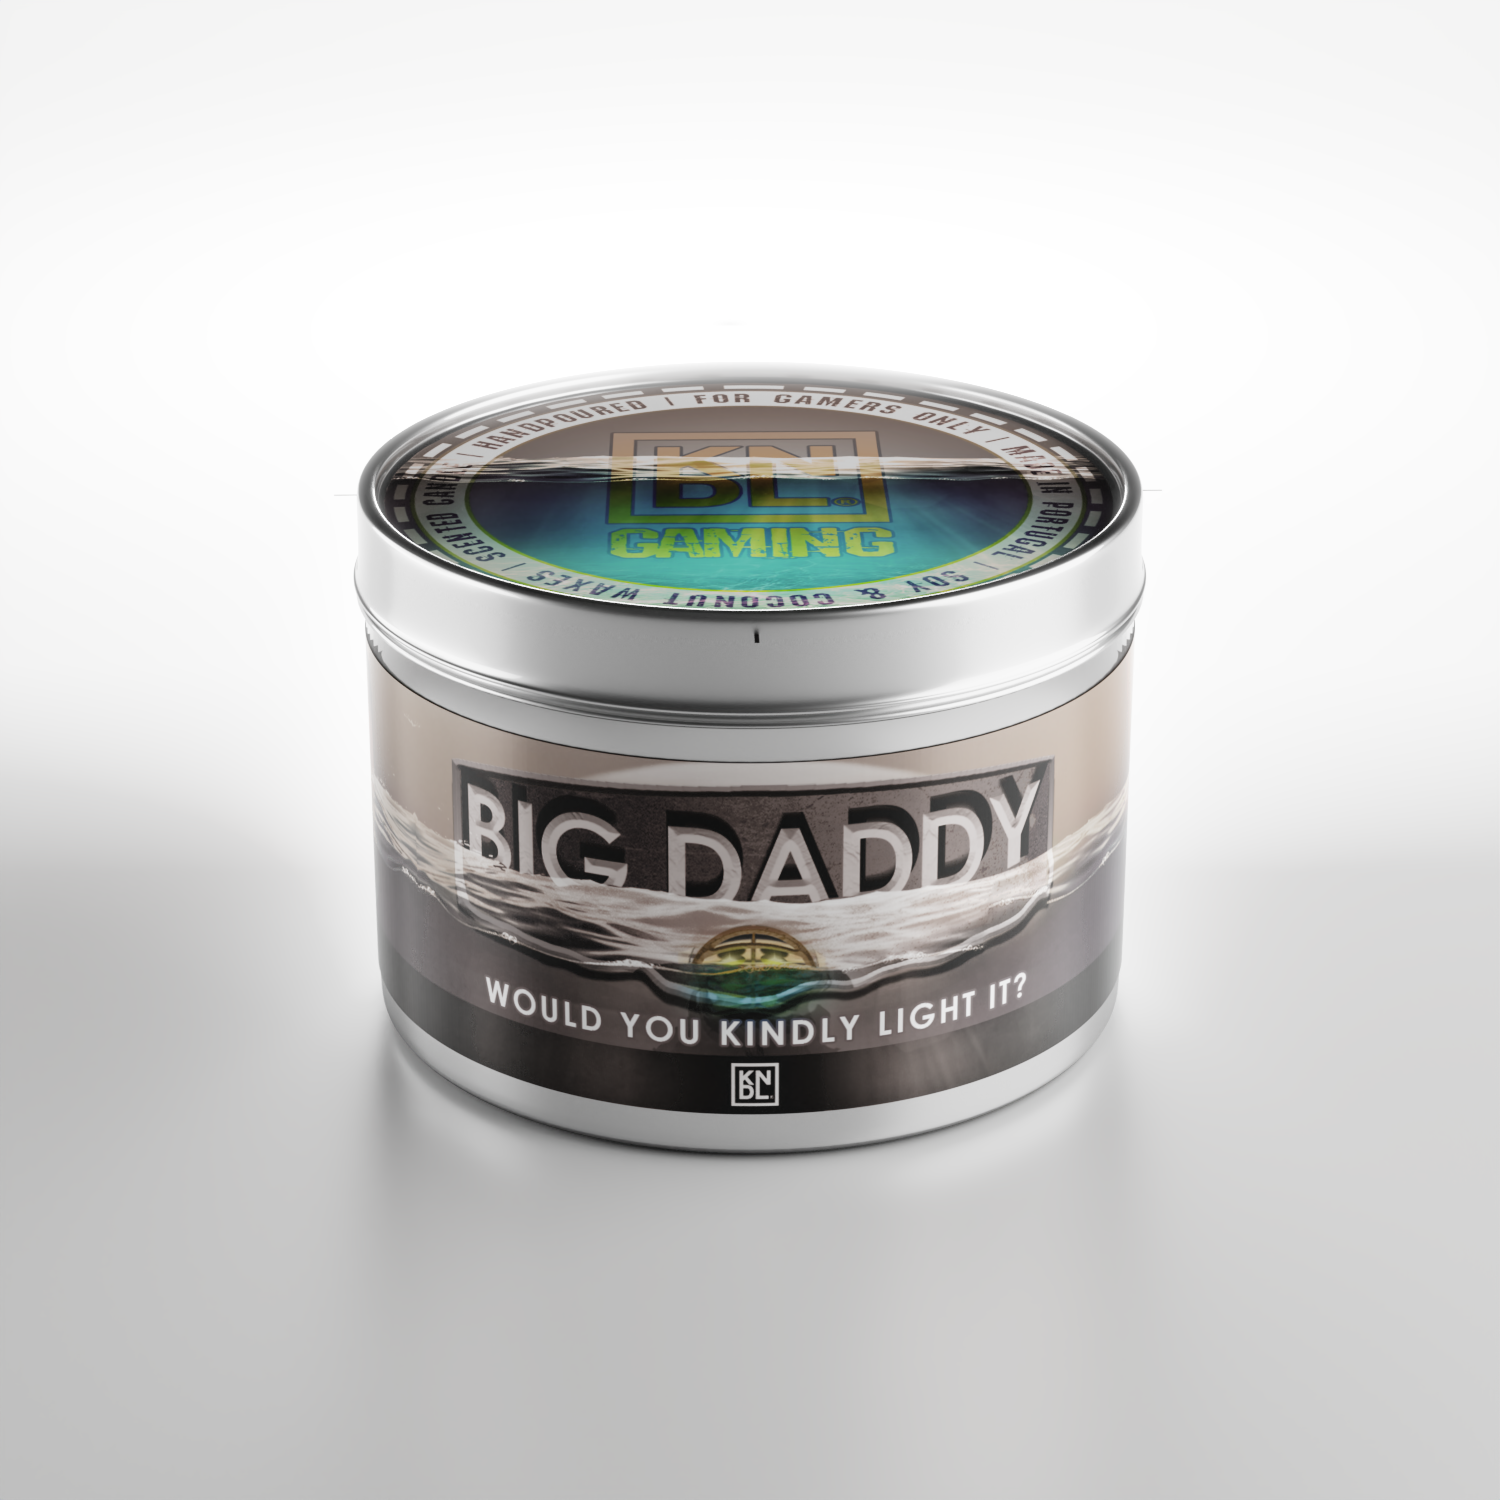 TIN NR 26 | BIG DADDY | BIOSHOCK INSPIRED SCENTED CANDLE